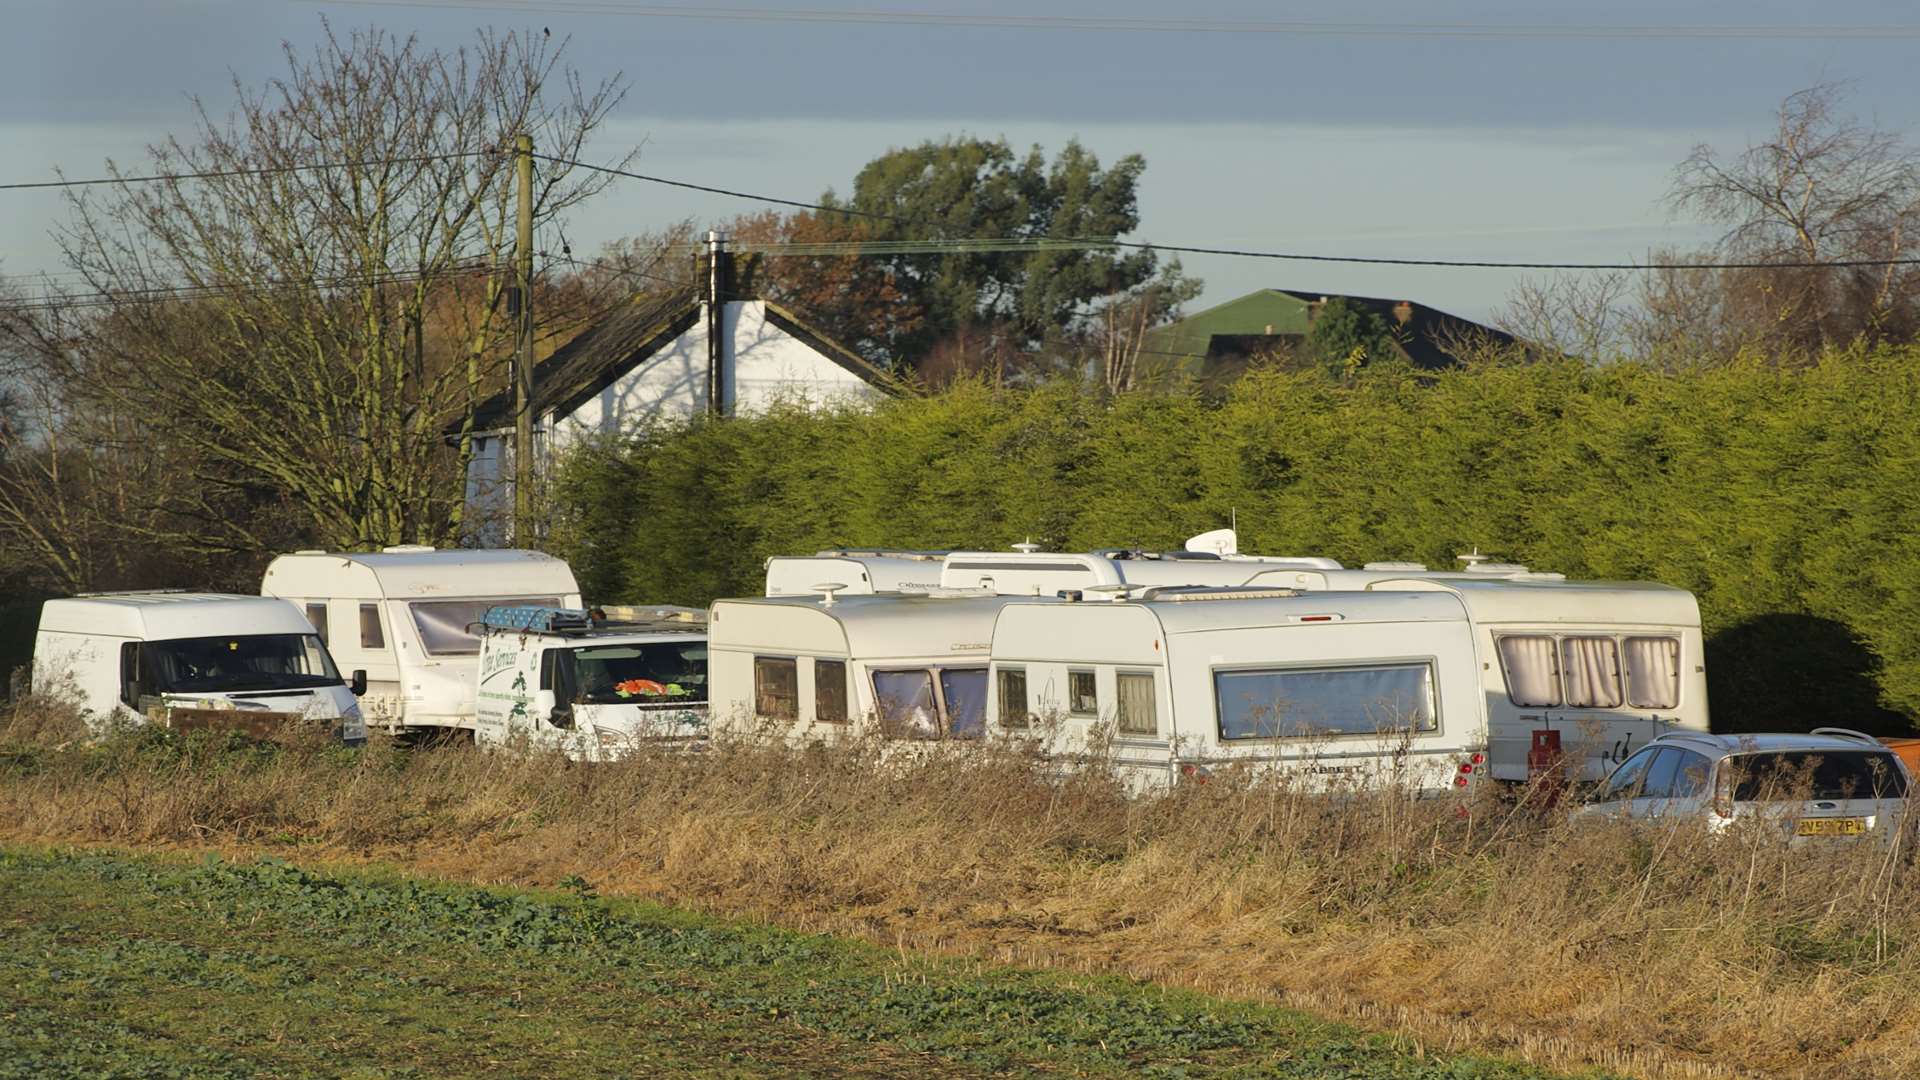 The travellers were parked illegally along Bobbing Hill, near Sittingbourne